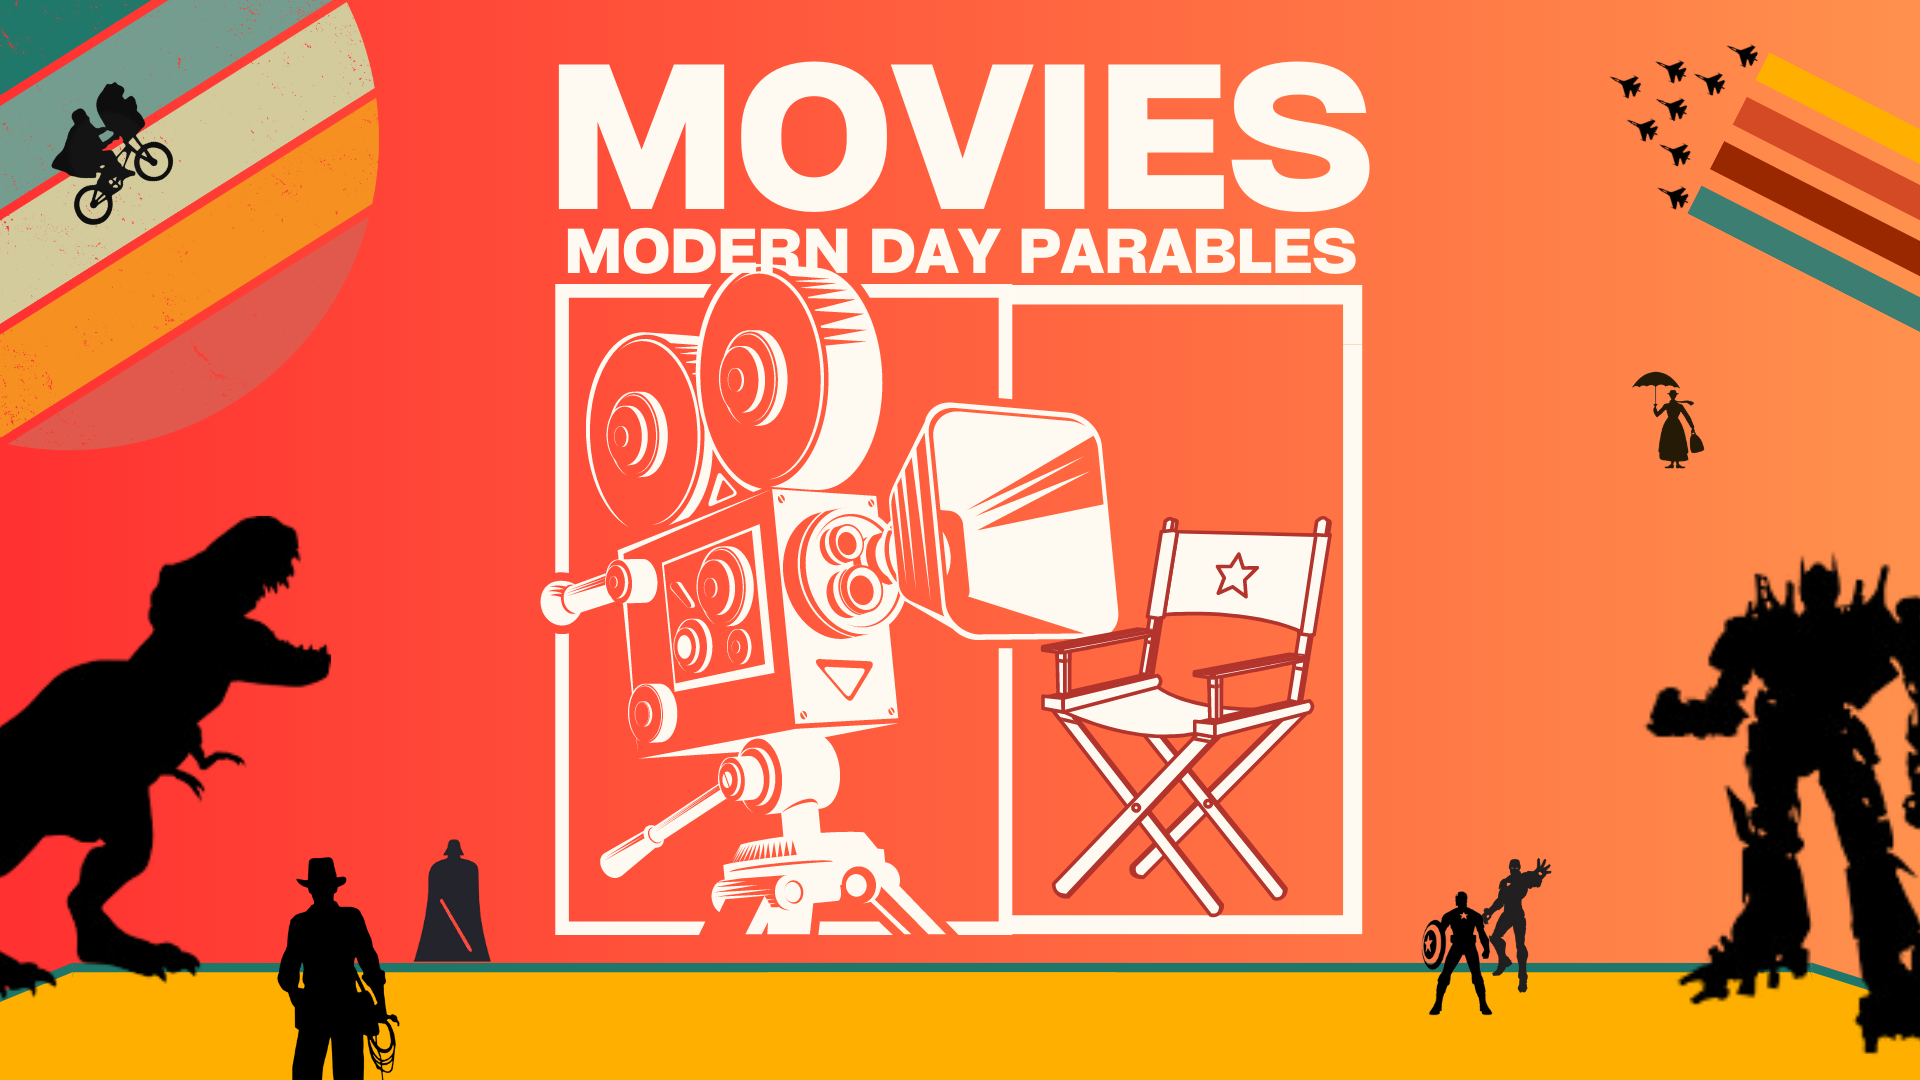 Movies Modern Day Parables, Week 4